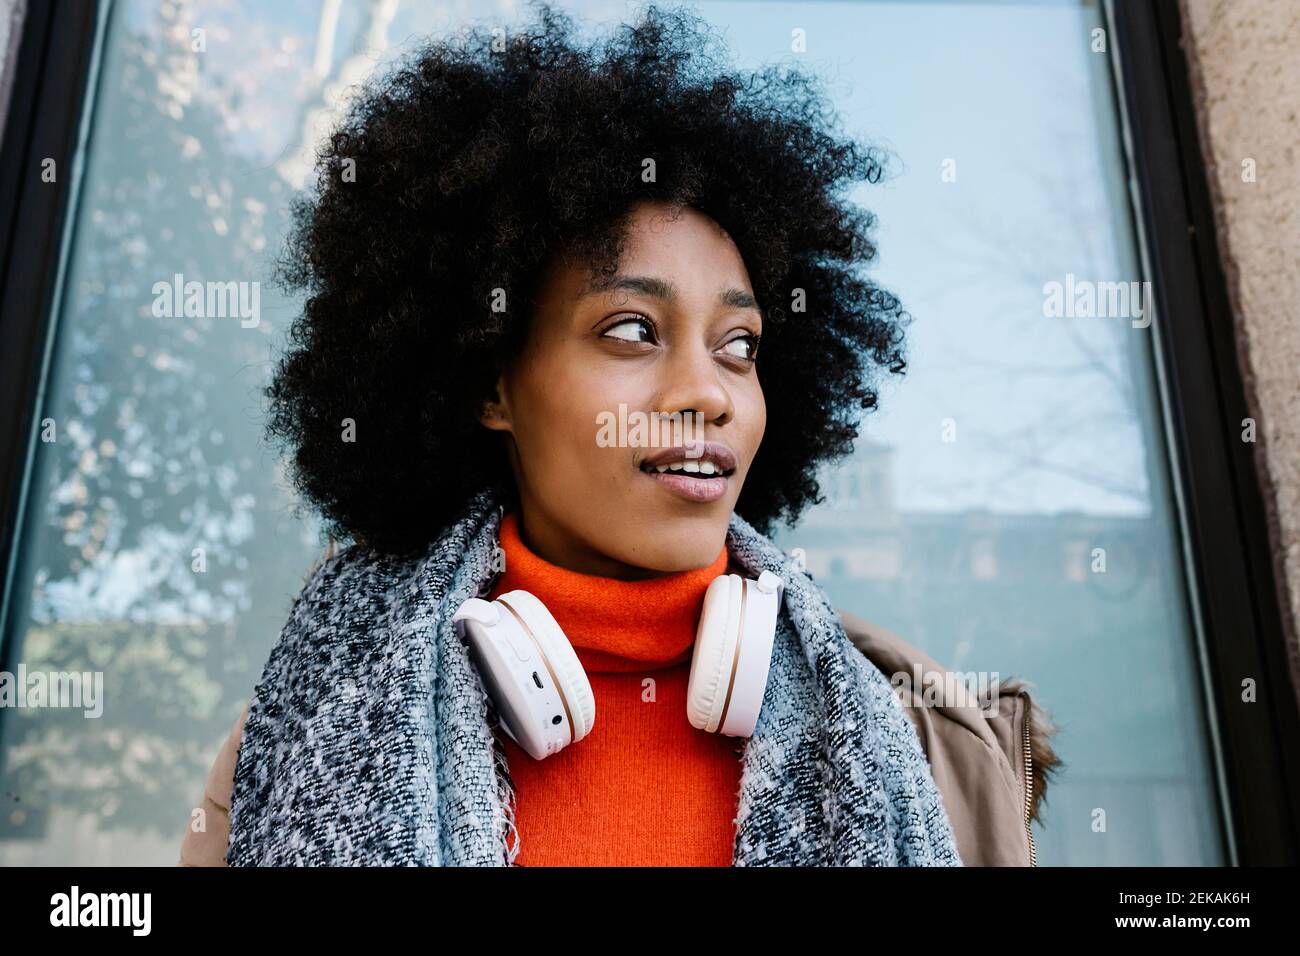 Afro woman with headphones contemplating against glass wall Stock Photo